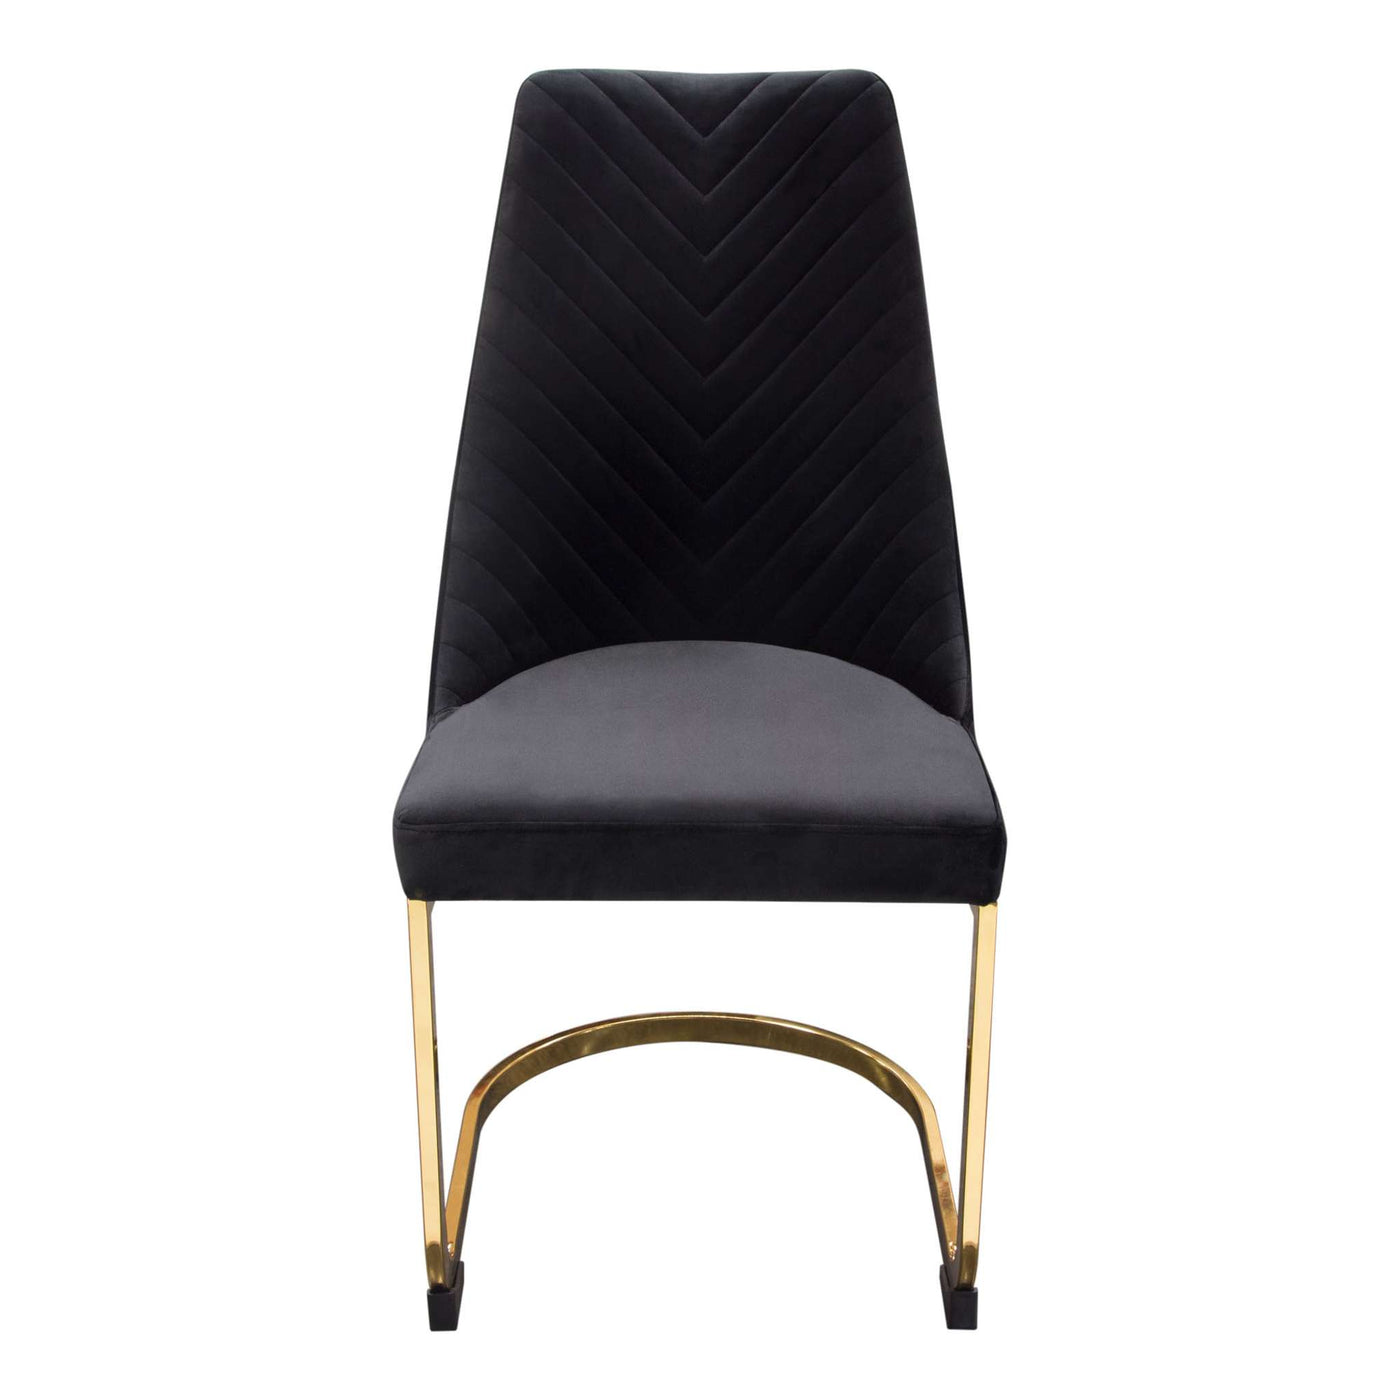 The Vogue Dining Chair by Diamond Sofa